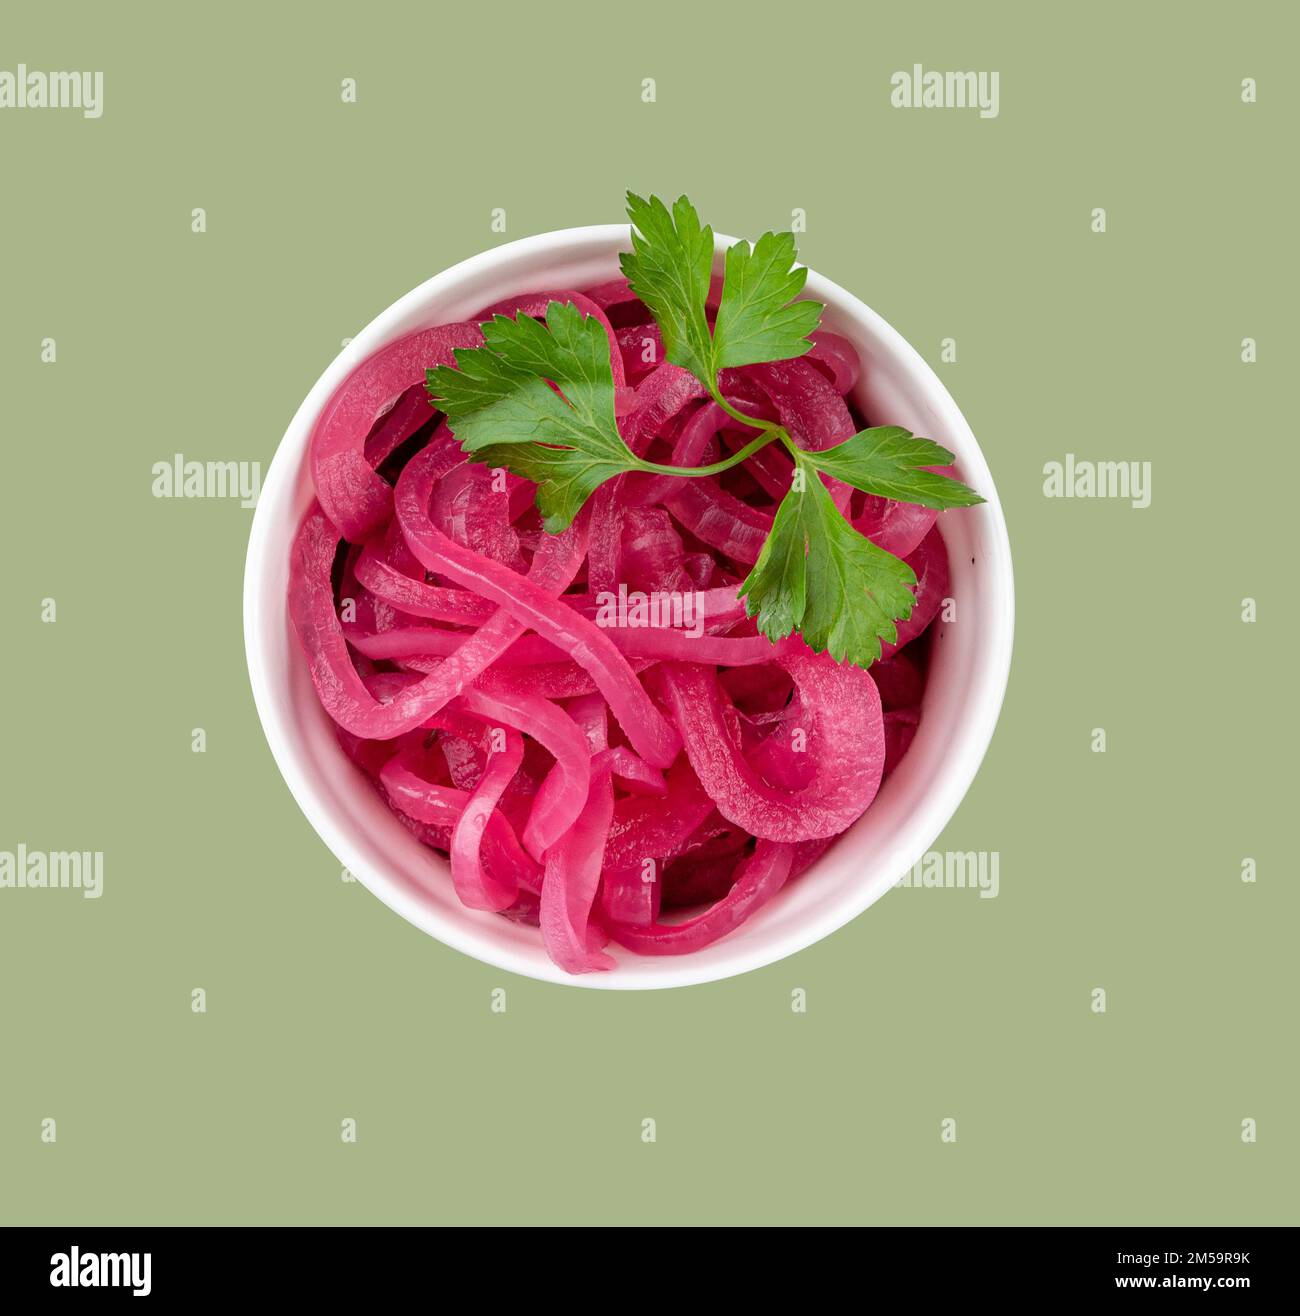 Pickled red onion rings in a white bowl with fresh herbs on green background. Healthy fermented food. Top view. Stock Photo